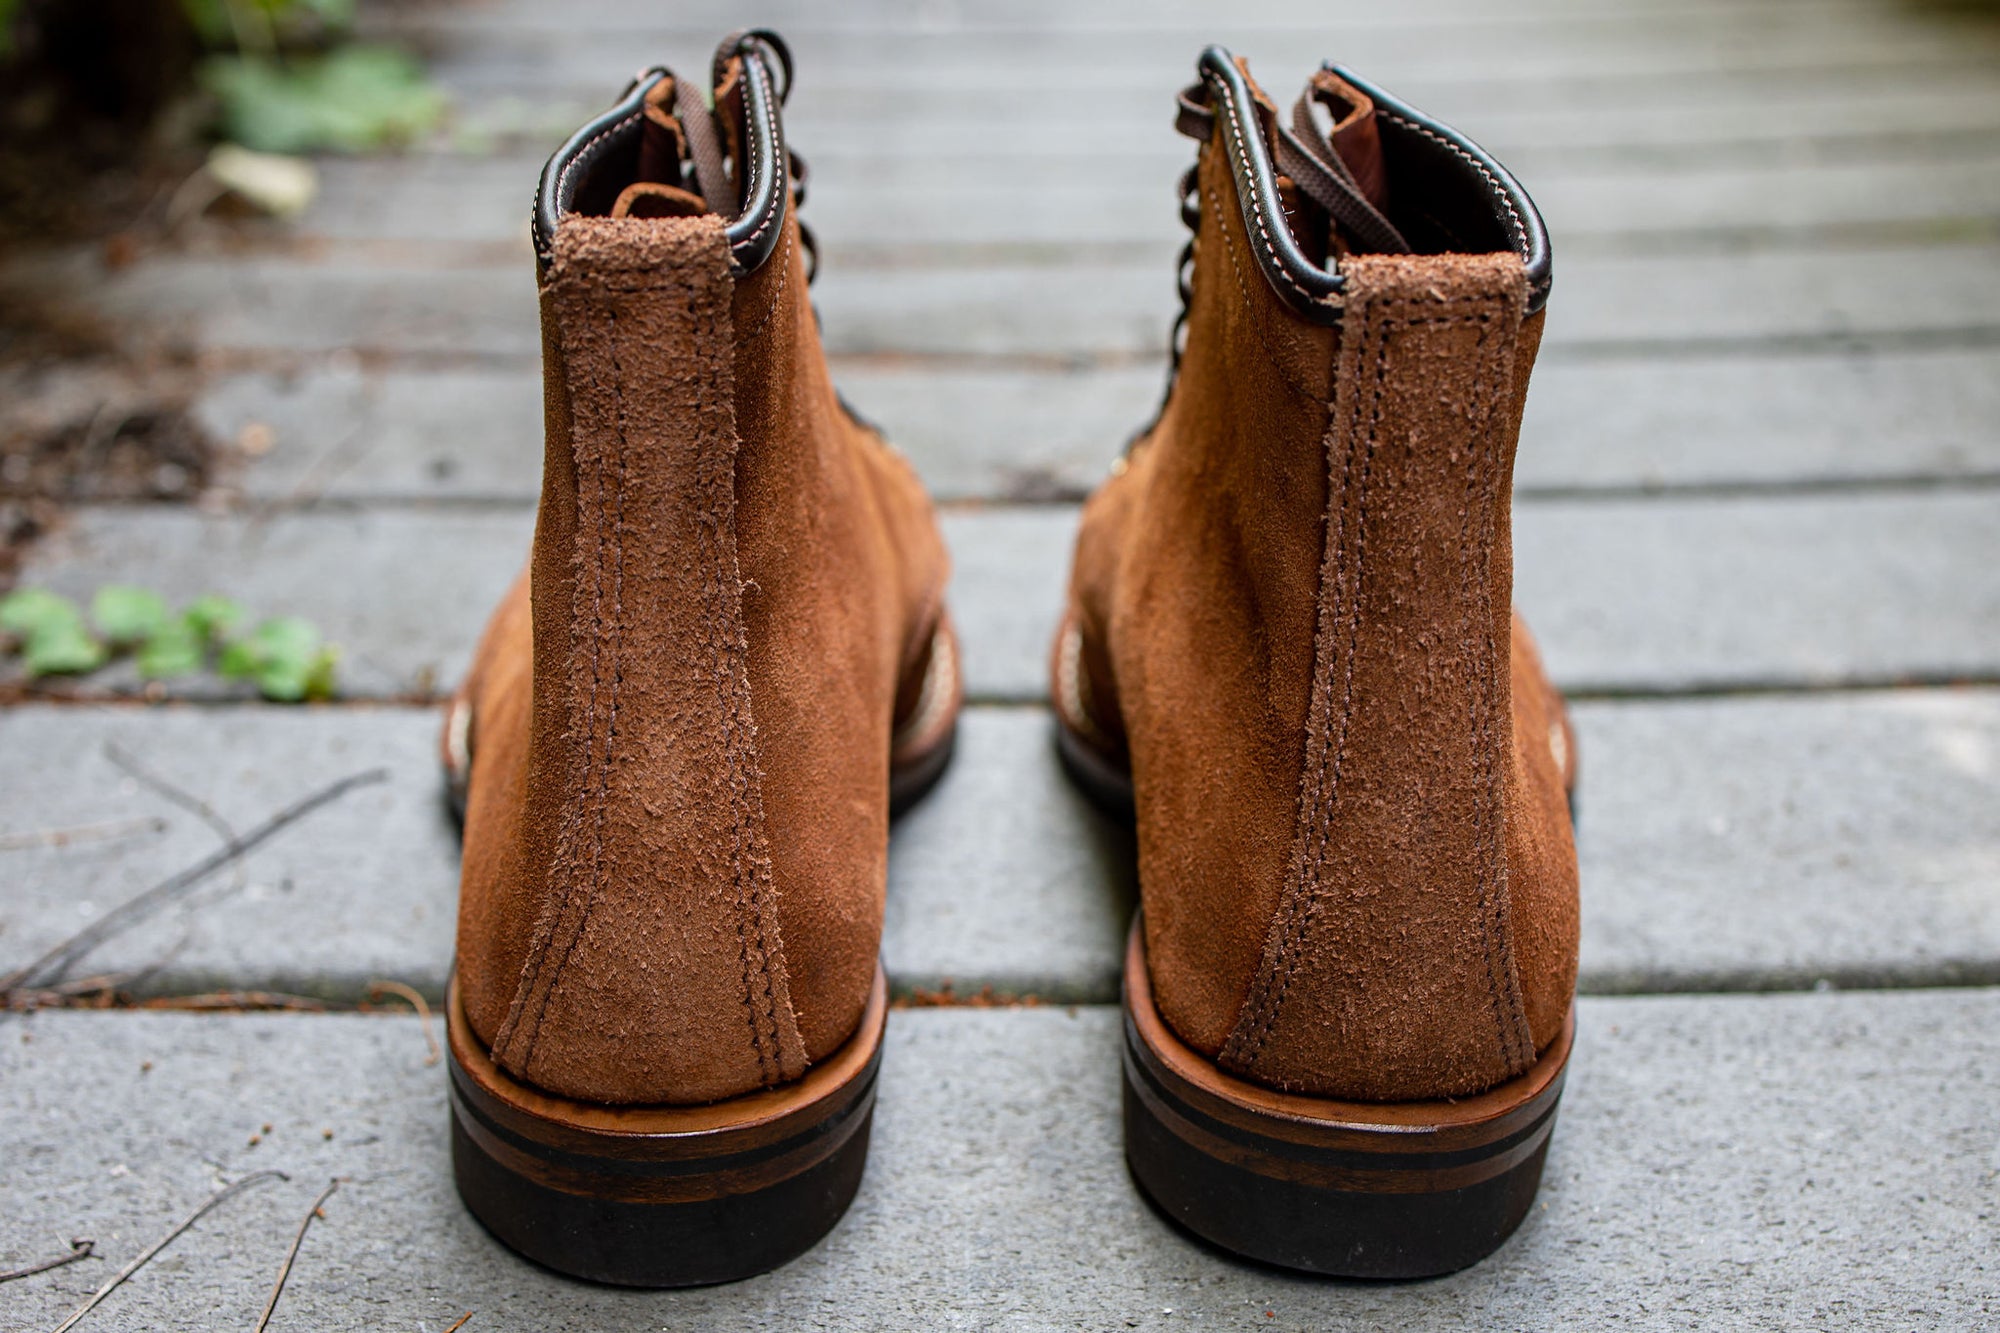 Wesco Boots Johannes - 7" Brown Oil Tan Roughout